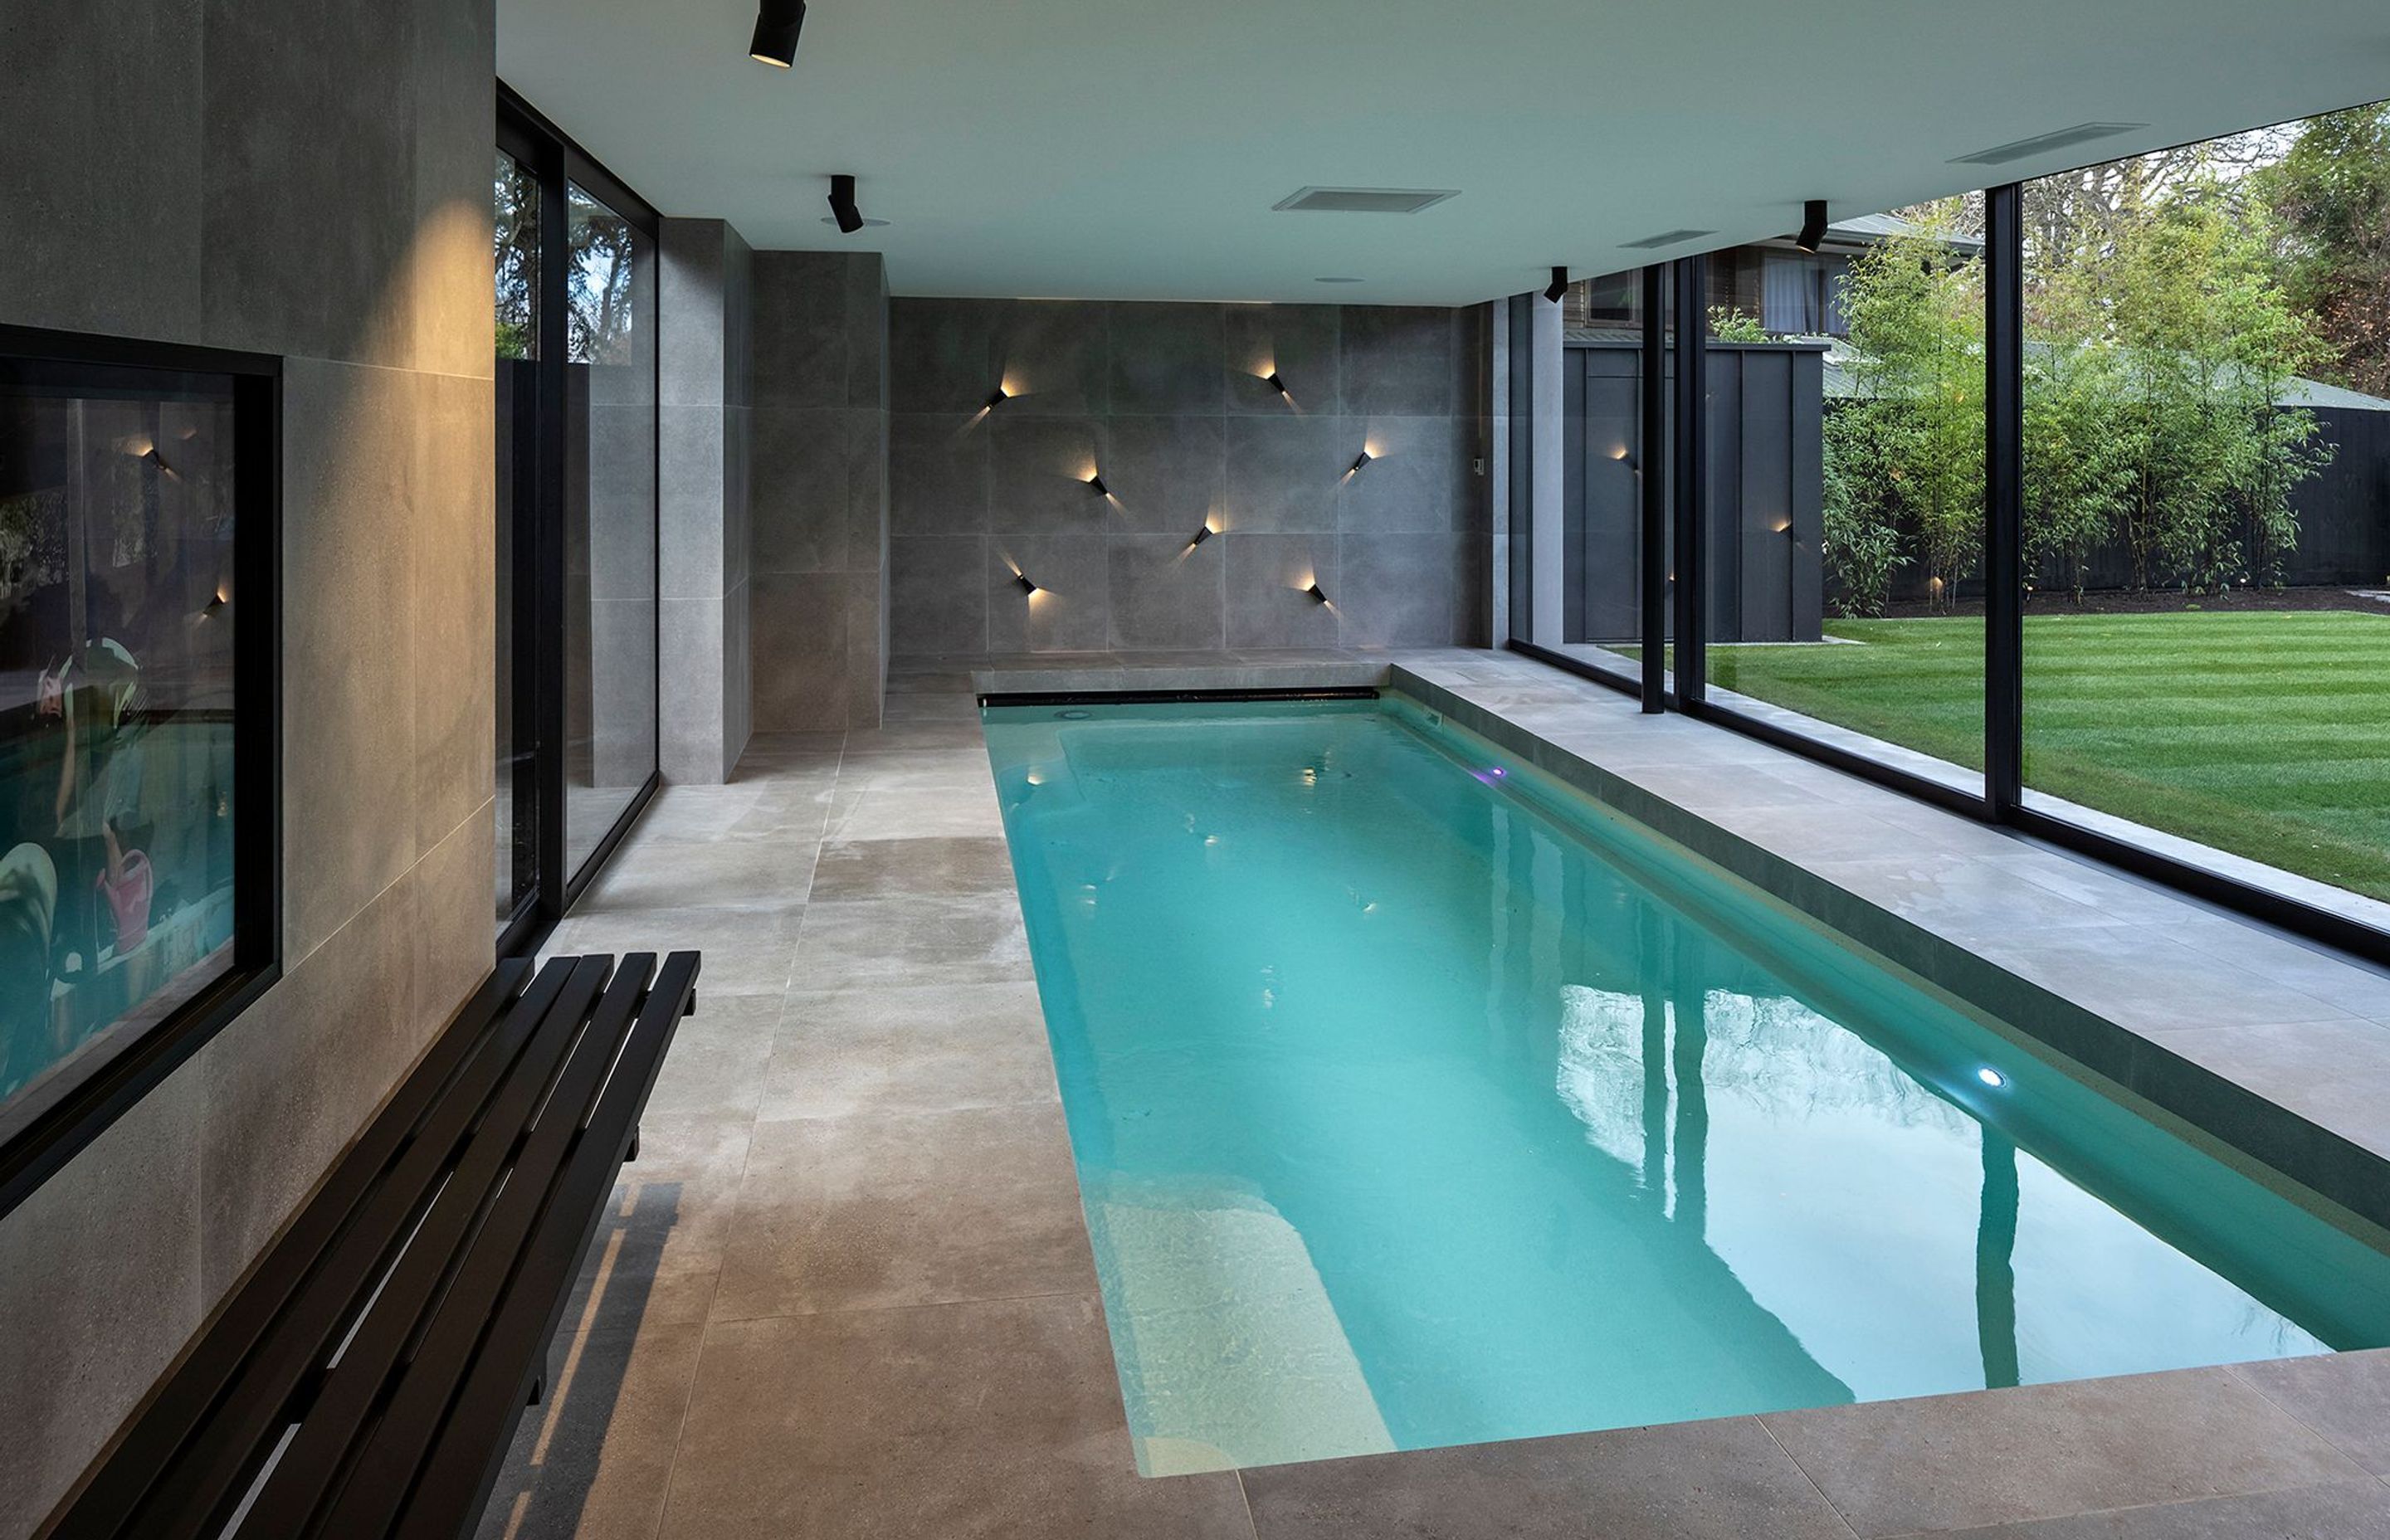 The pool house was a late addition to the design but adds another level of functionality to the house.